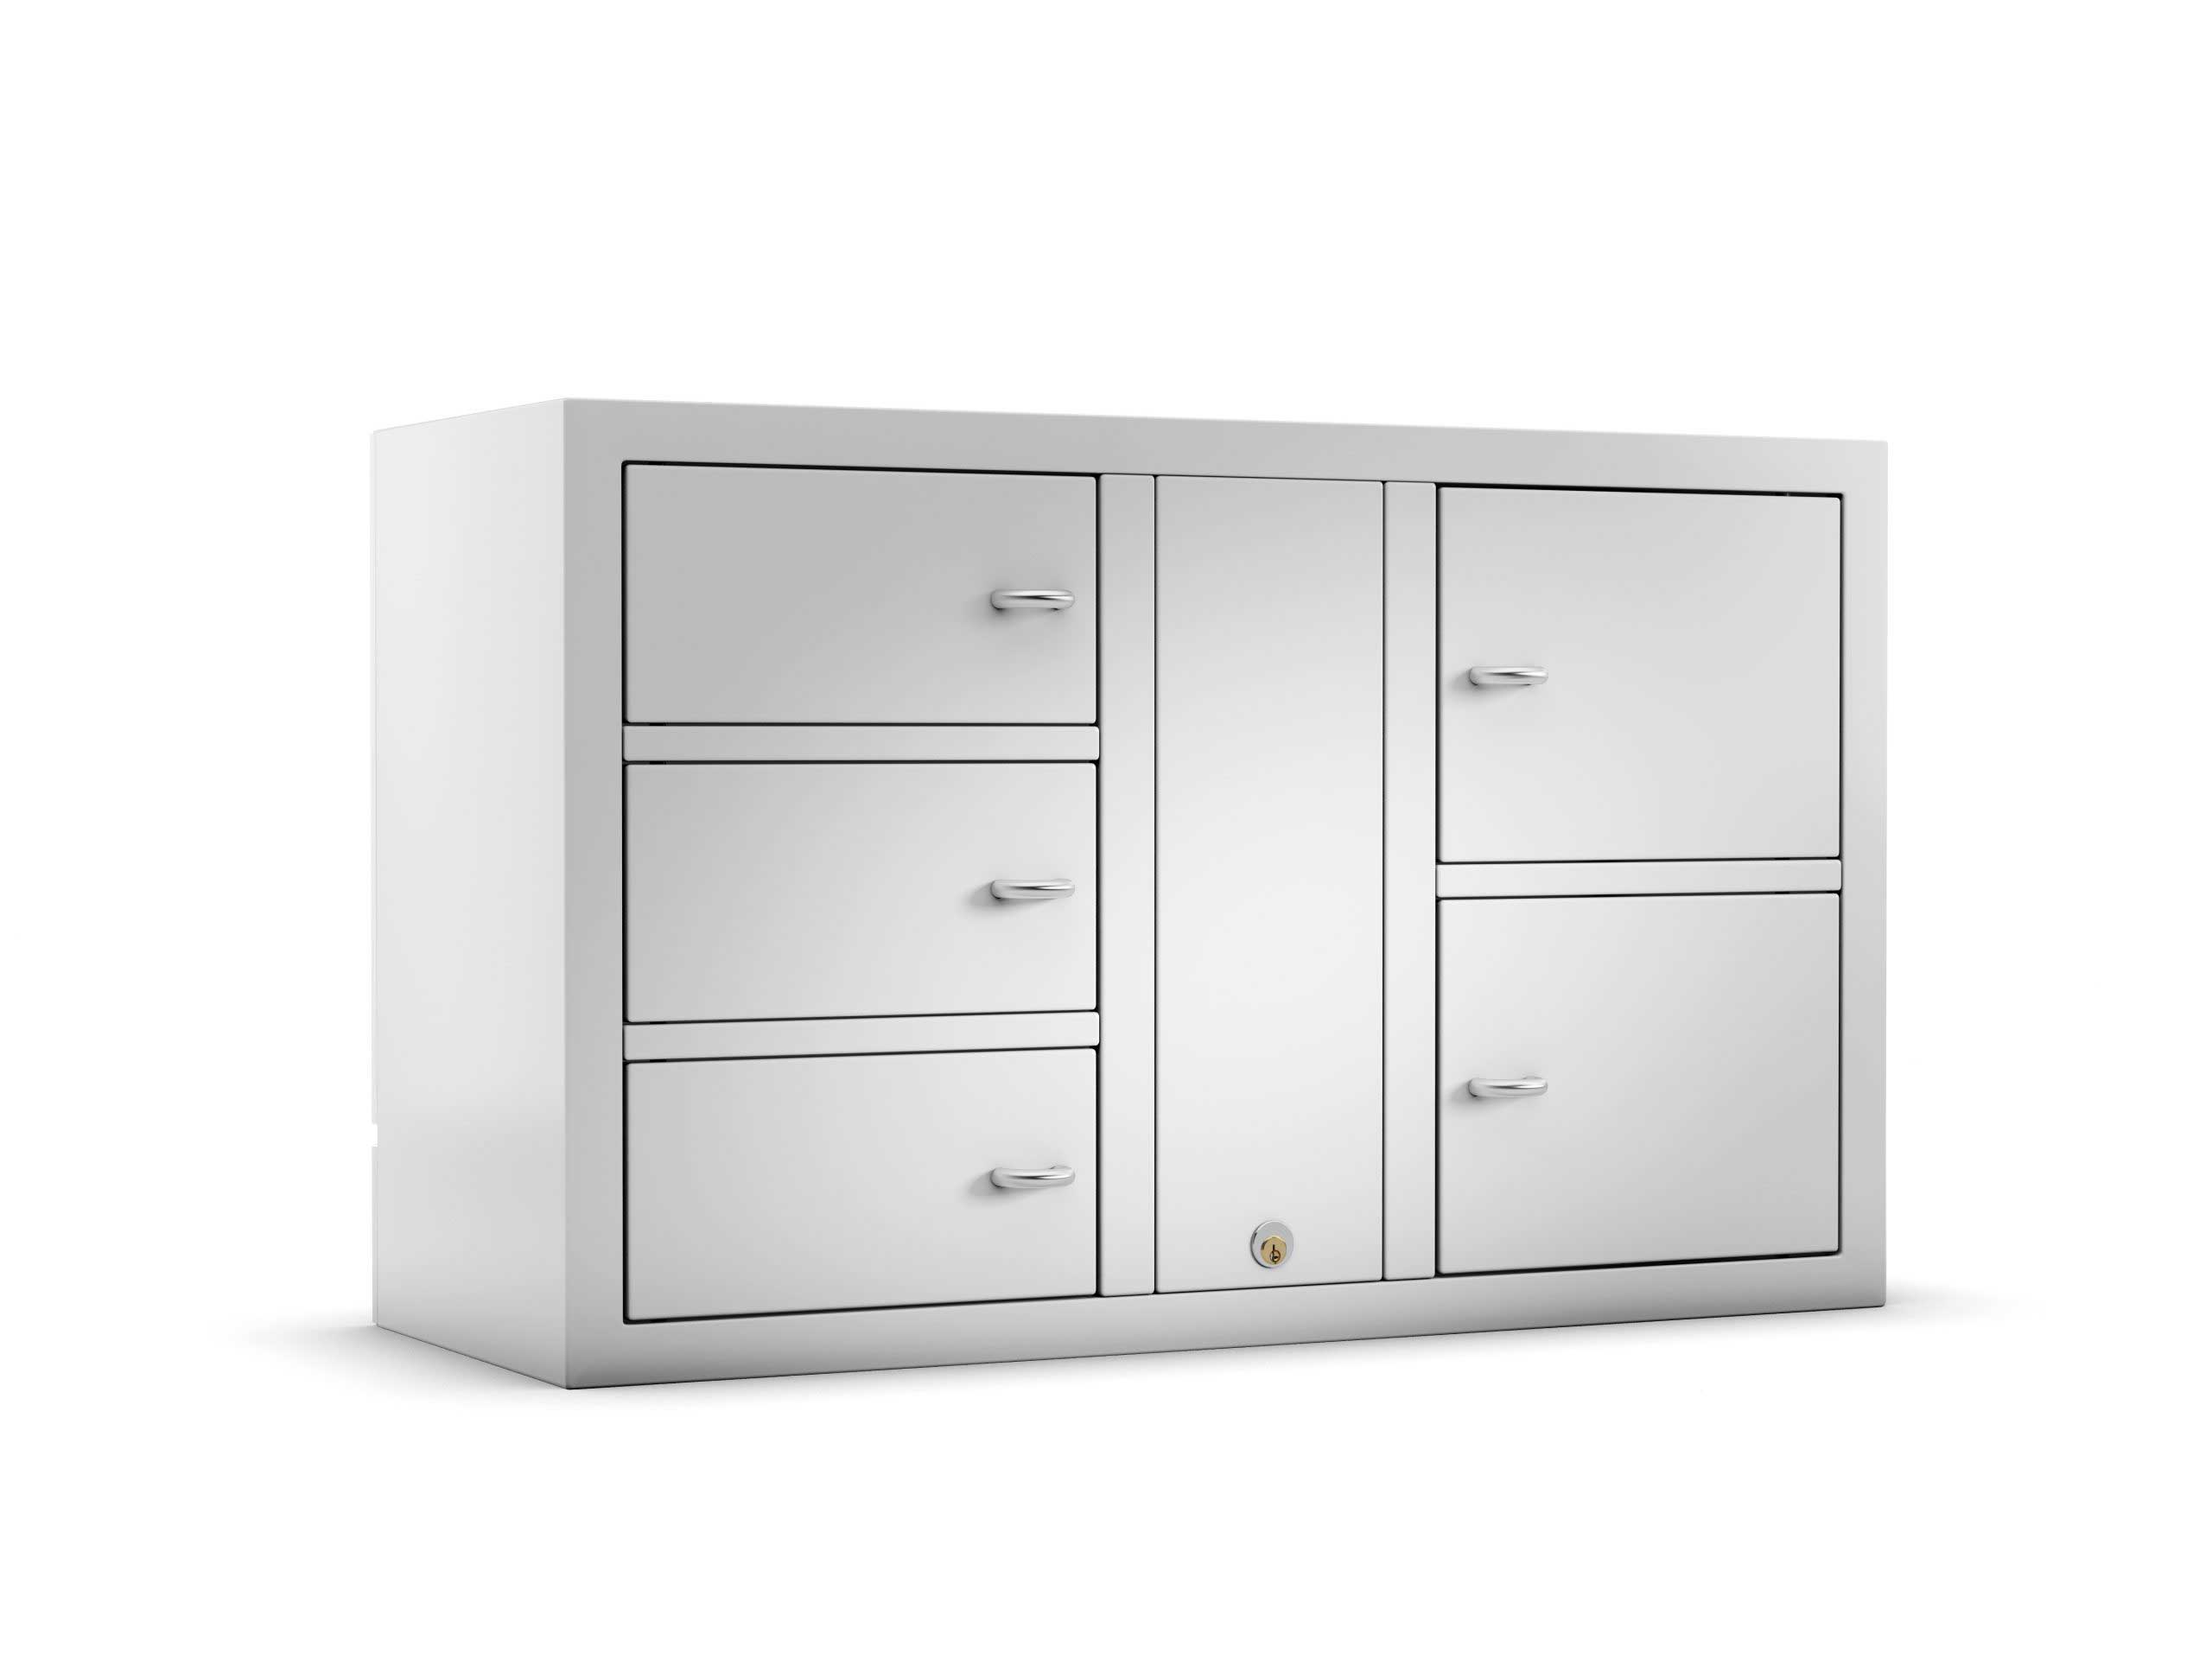 Valuables cabinet 7005 E in the Expansion series with 3 smaller doors and 2 larger doors